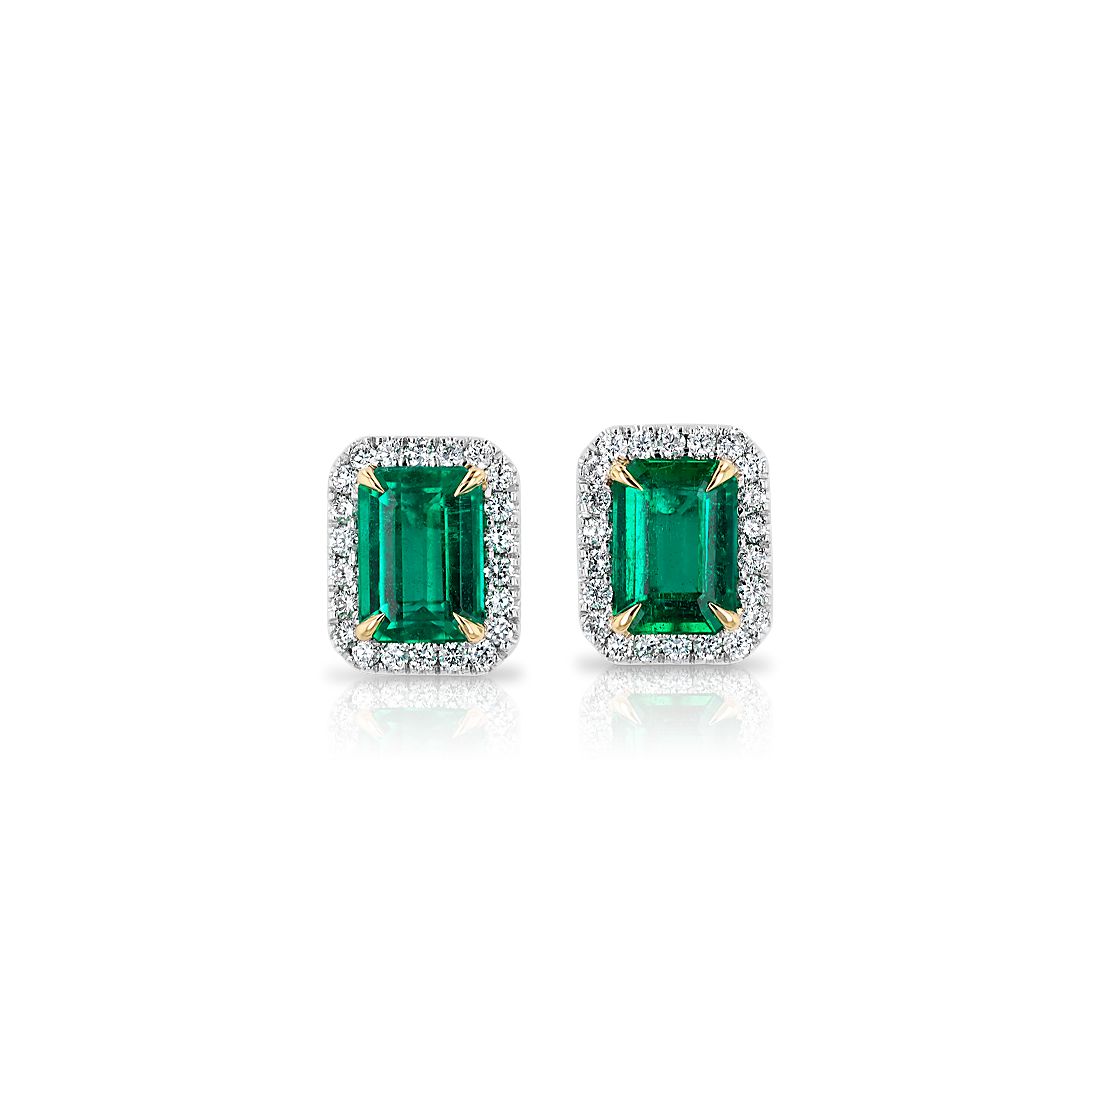 Emerald-Cut Stud Earrings with Diamond Halo in 14k White Gold with 14k Yellow Gold Prongs (7x5mm)